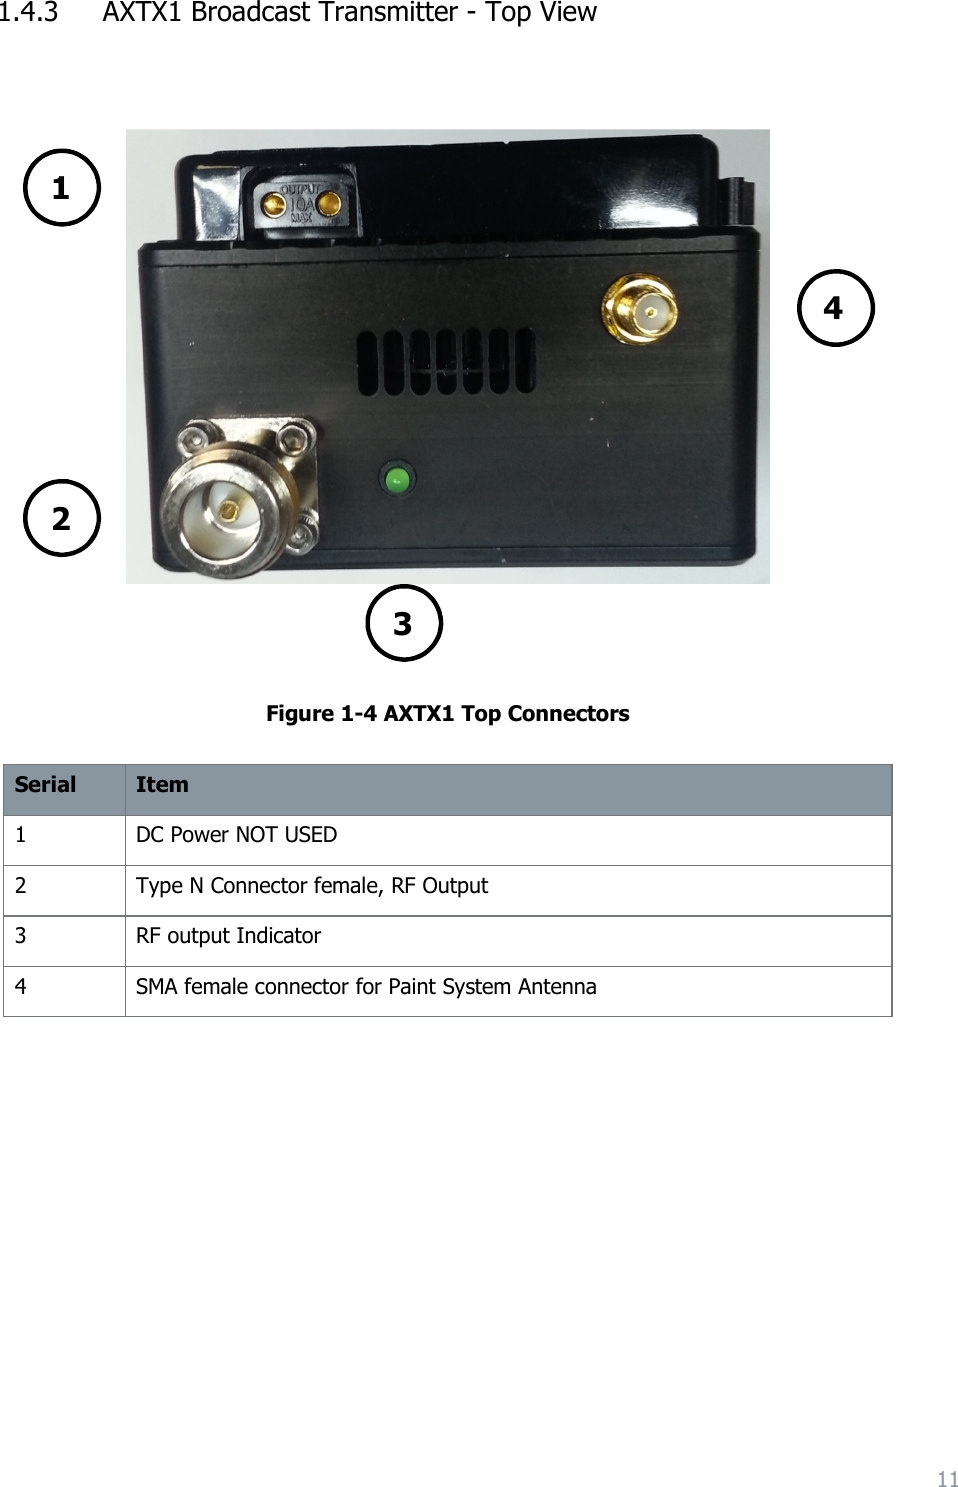 11  1.4.3 AXTX1 Broadcast Transmitter - Top View         Figure 1-4 AXTX1 Top Connectors  Serial Item 1 DC Power NOT USED 2 Type N Connector female, RF Output 3 RF output Indicator 4 SMA female connector for Paint System Antenna           1 2 3 4 